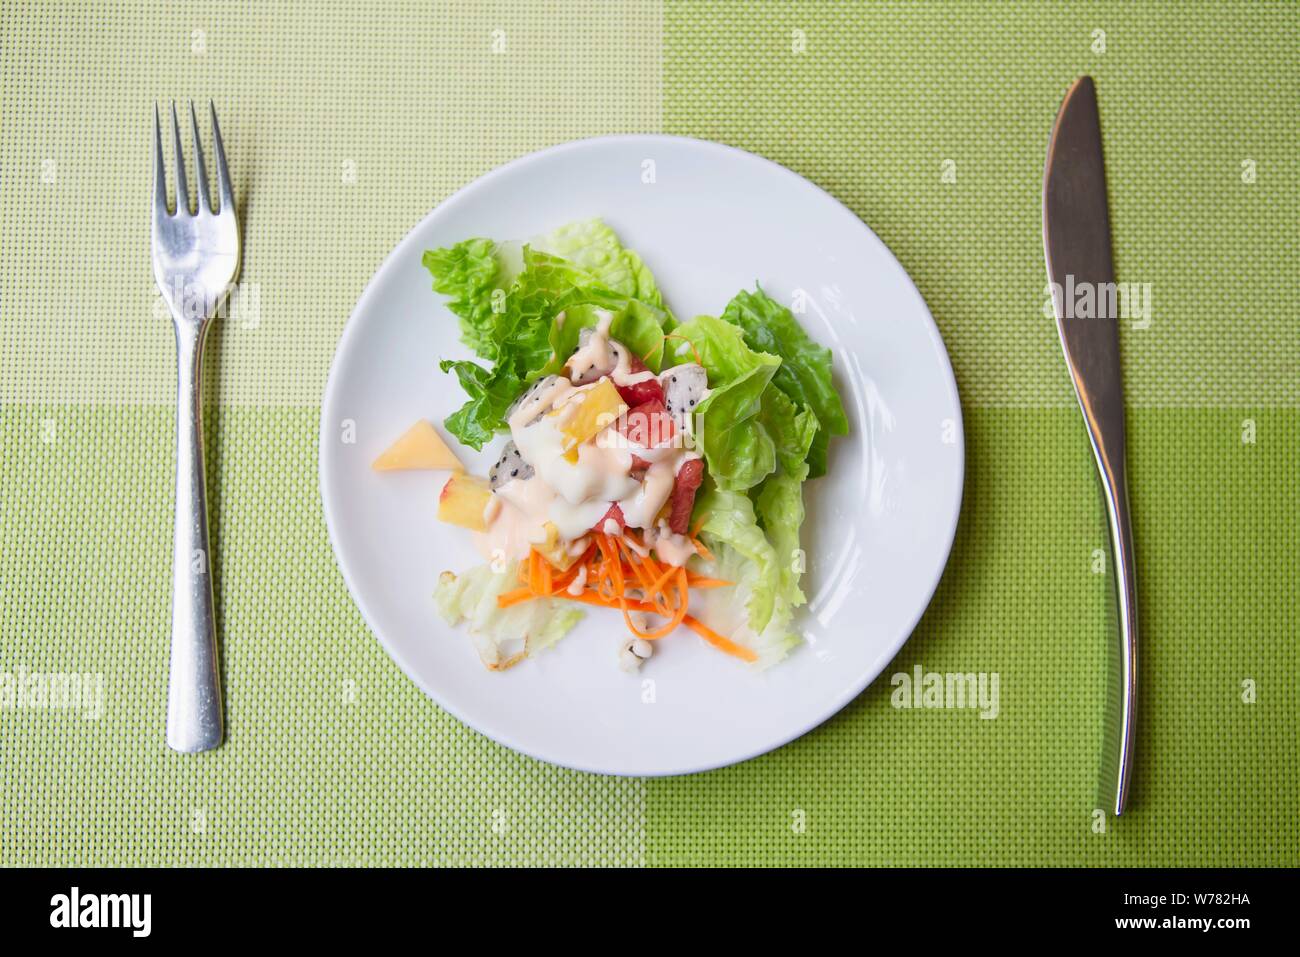 Fresh vegetable healthy salad on white plate ready for eating - fresh healthy food concept Stock Photo